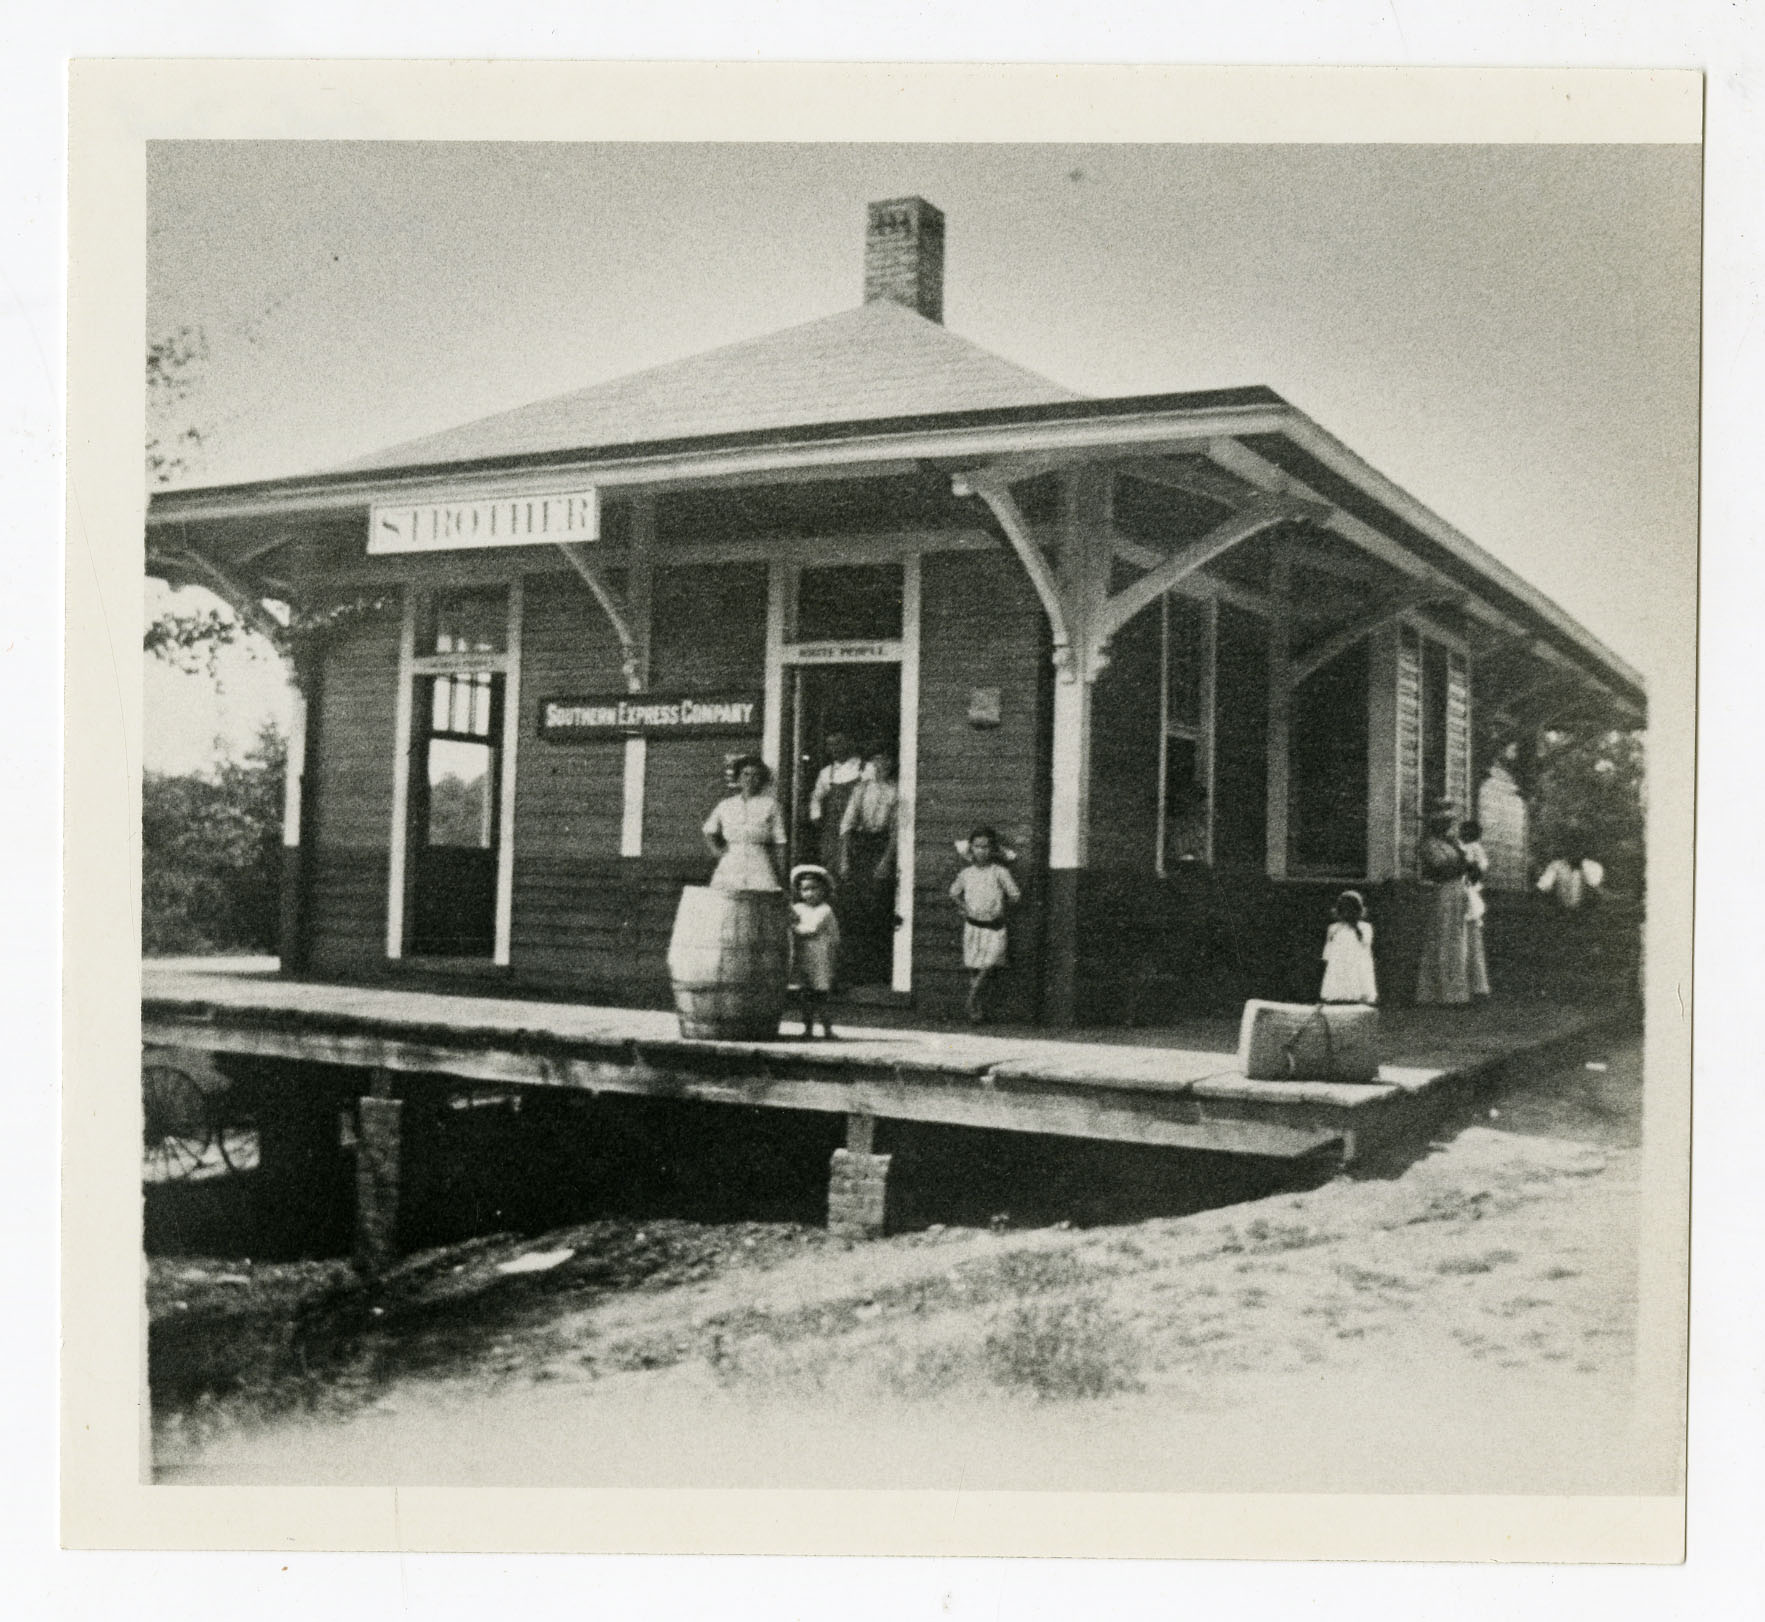 Strothers RR Station: Courtesy of the WU Pettus Archives, White Collection - 2023